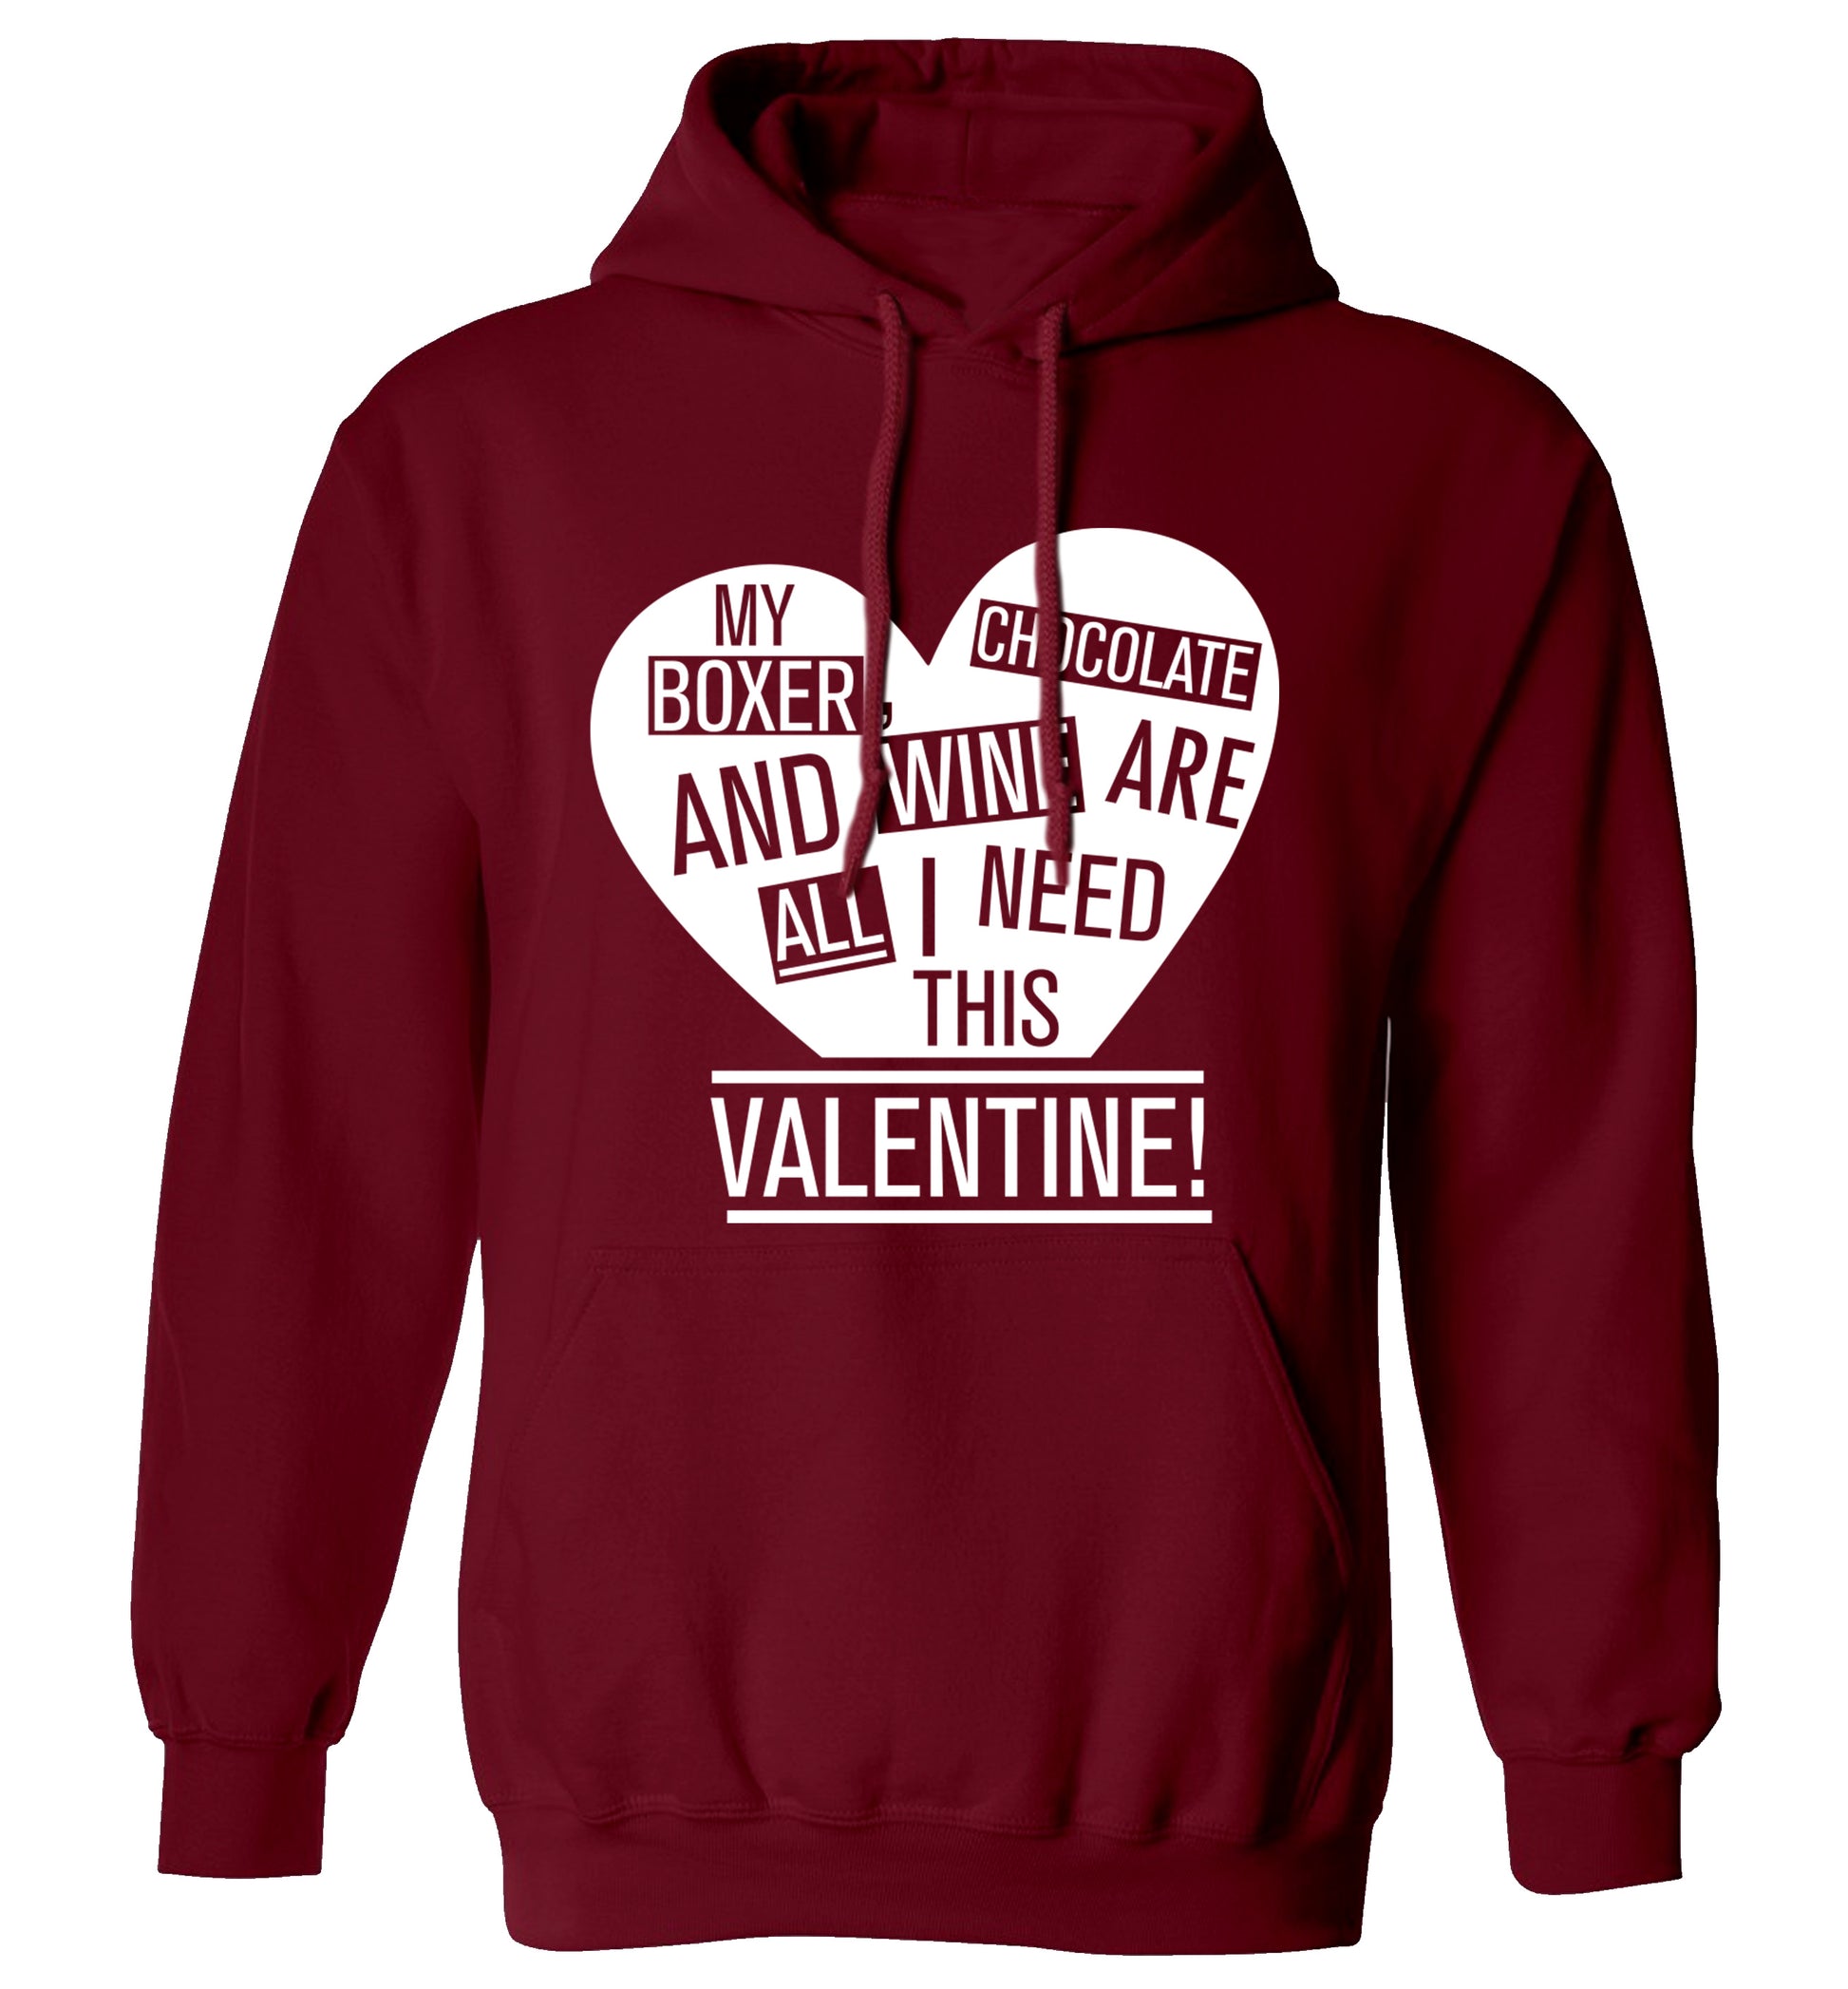 My Boxer, chocolate and wine are all I need this valentine! adults unisex maroon hoodie 2XL